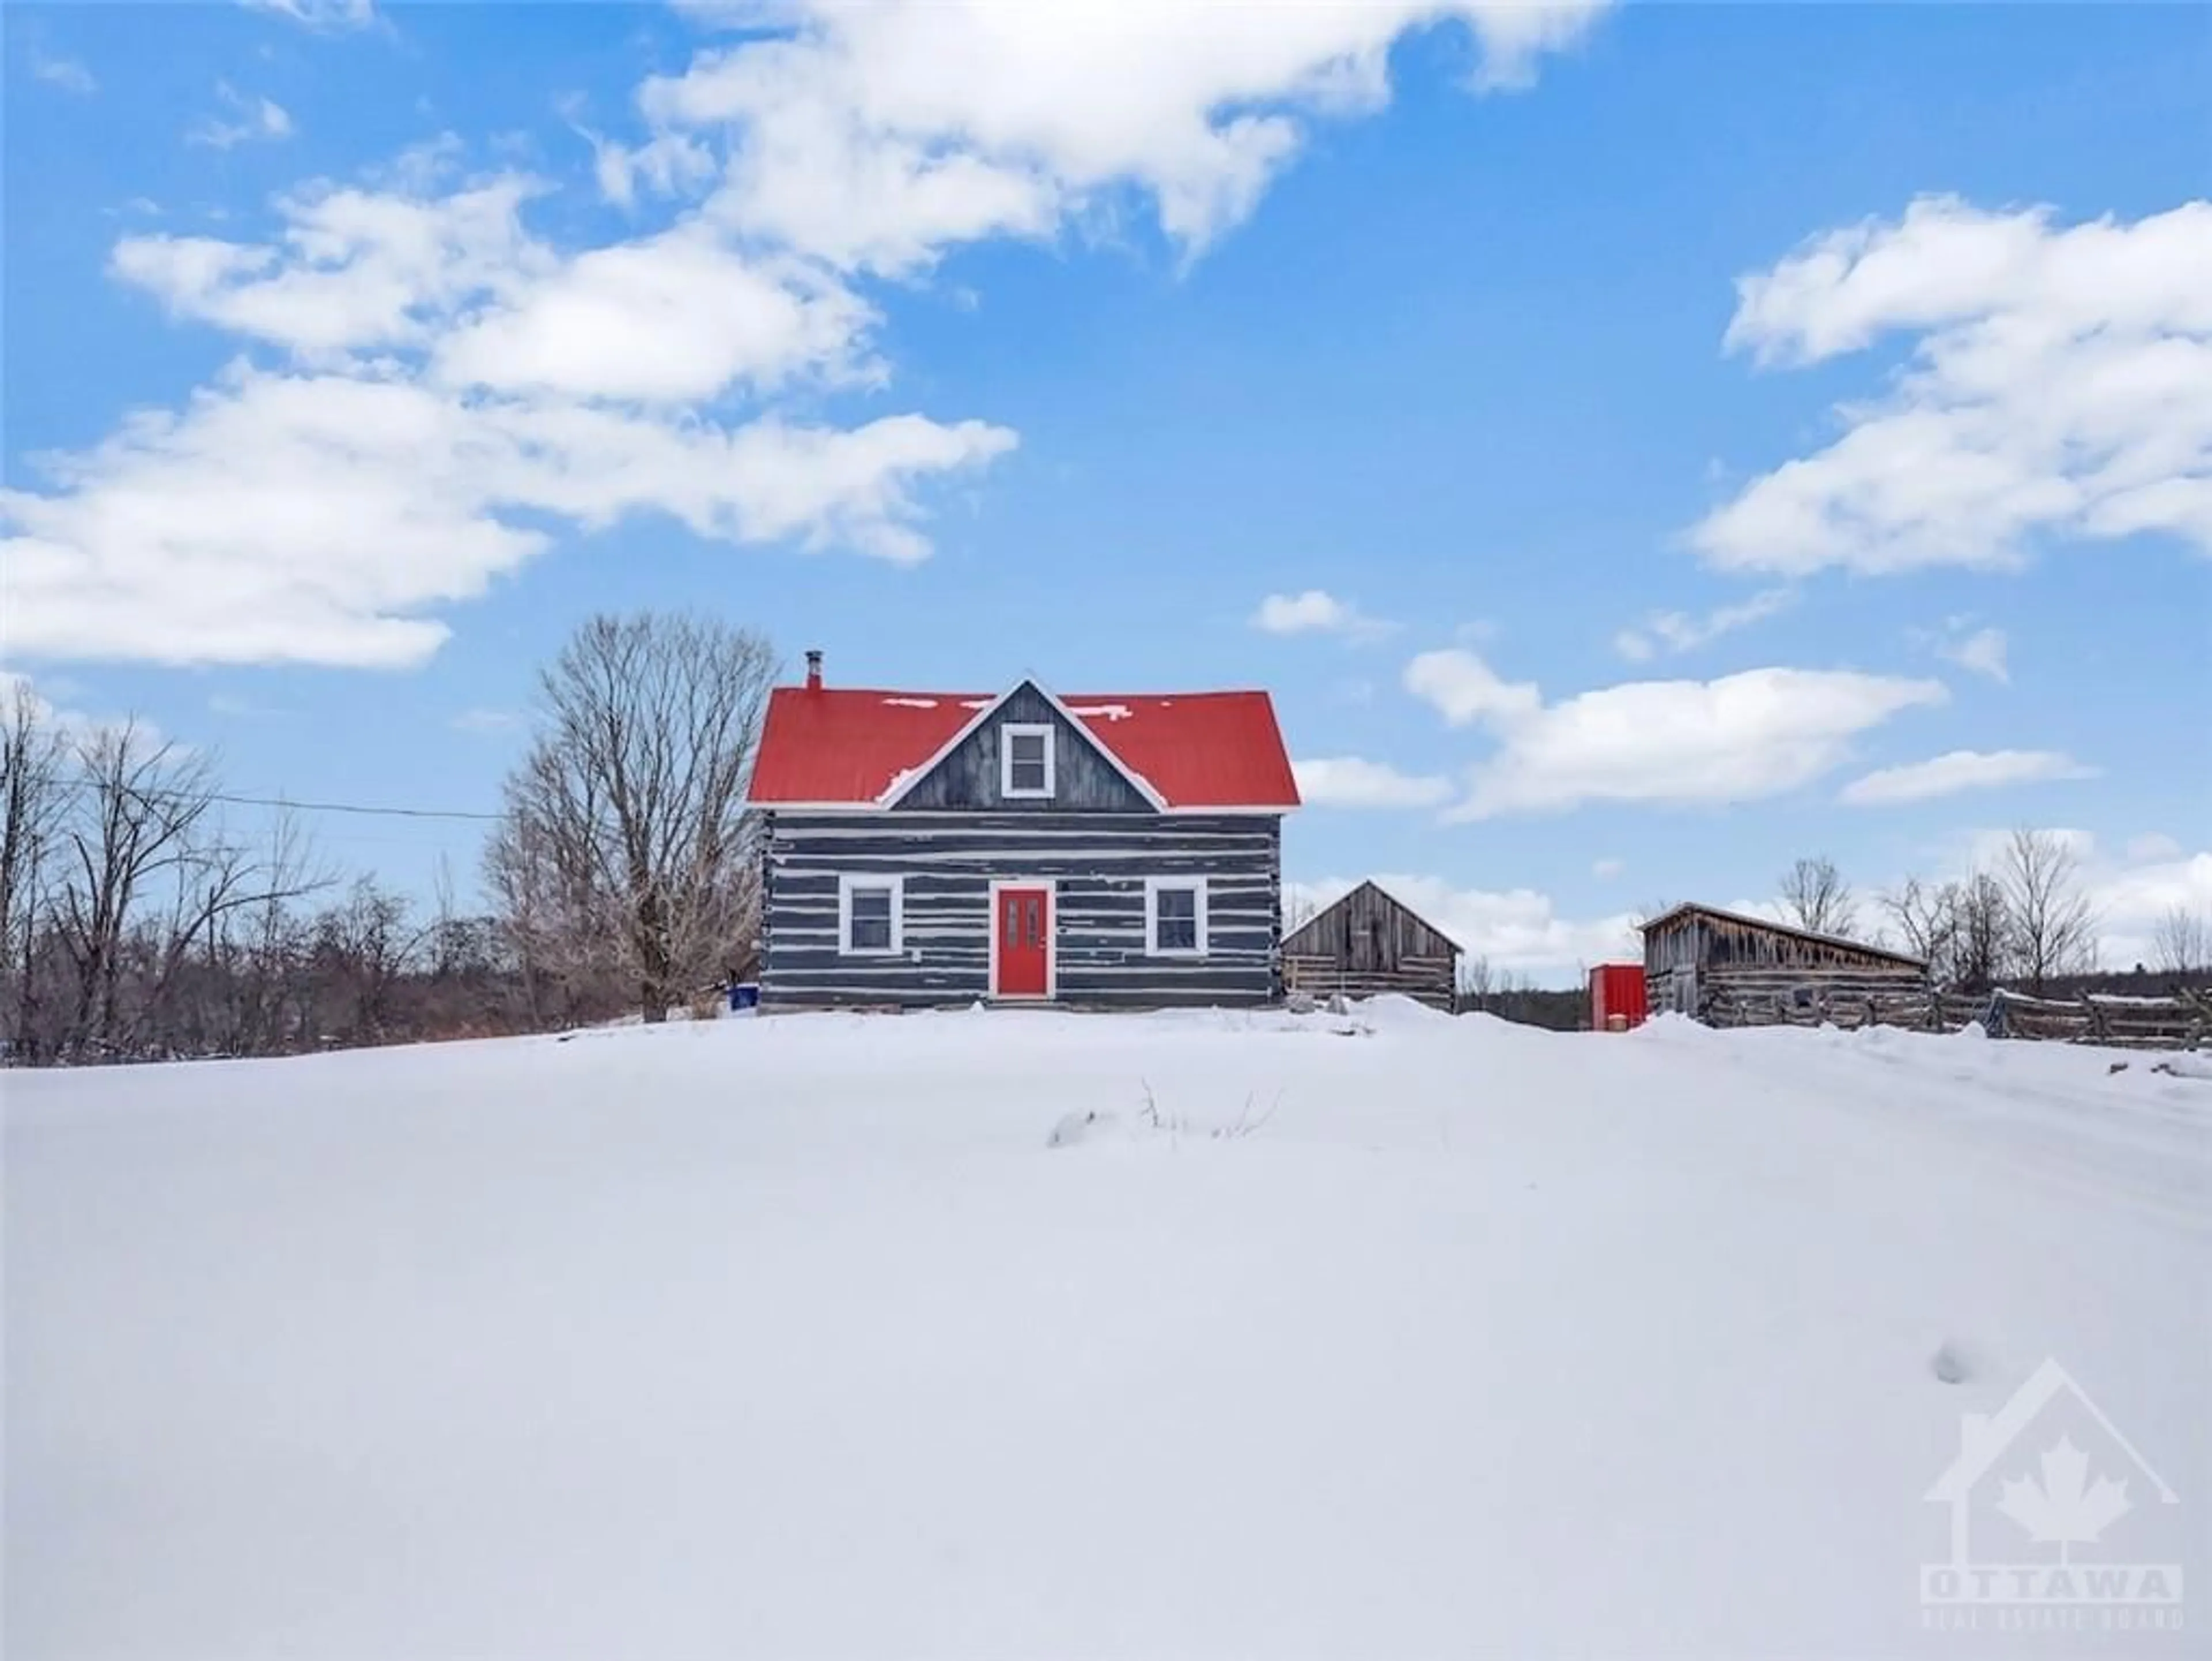 Cottage for 841 OLD UNION HALL Rd, Almonte Ontario K0A 1A0